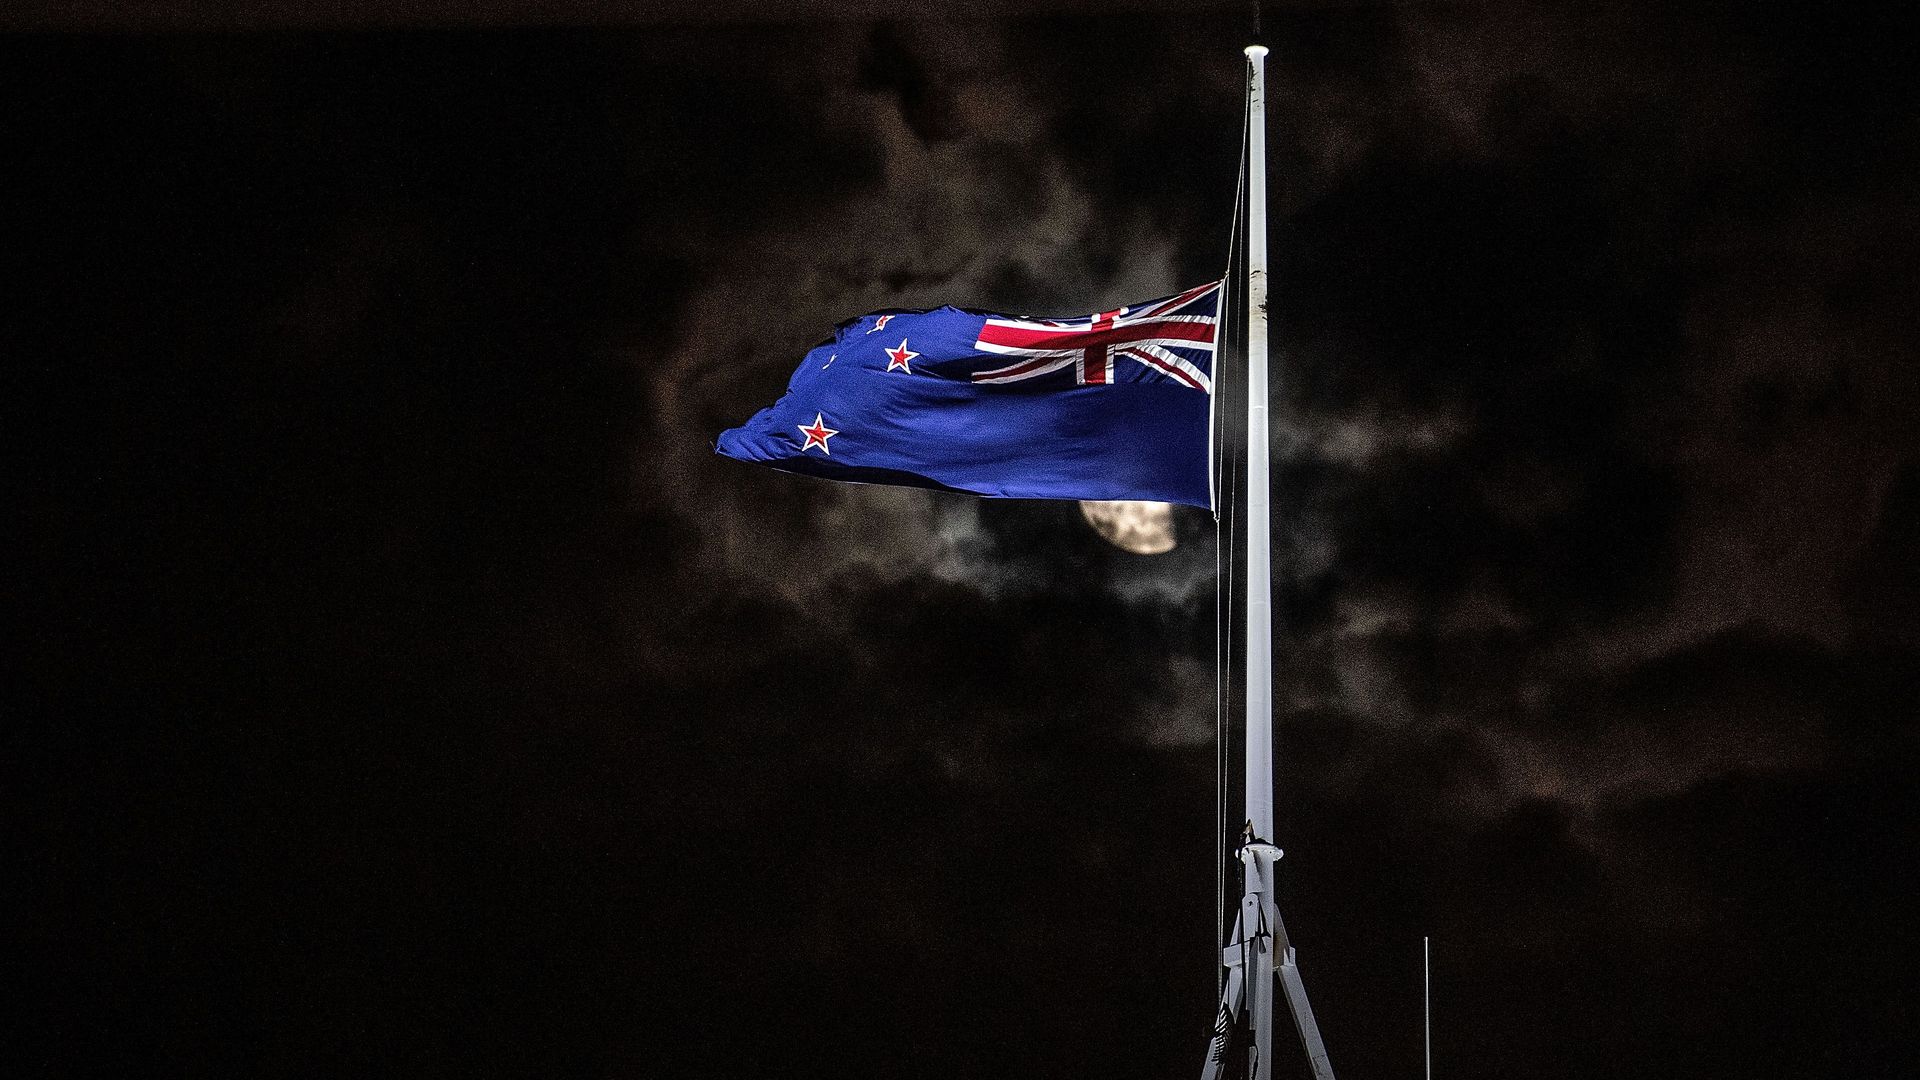 The New Zealand national flag is flown at half-mast on a Parliament building in Wellington on March 15, 2019, after a shooting incident in Christchurch.